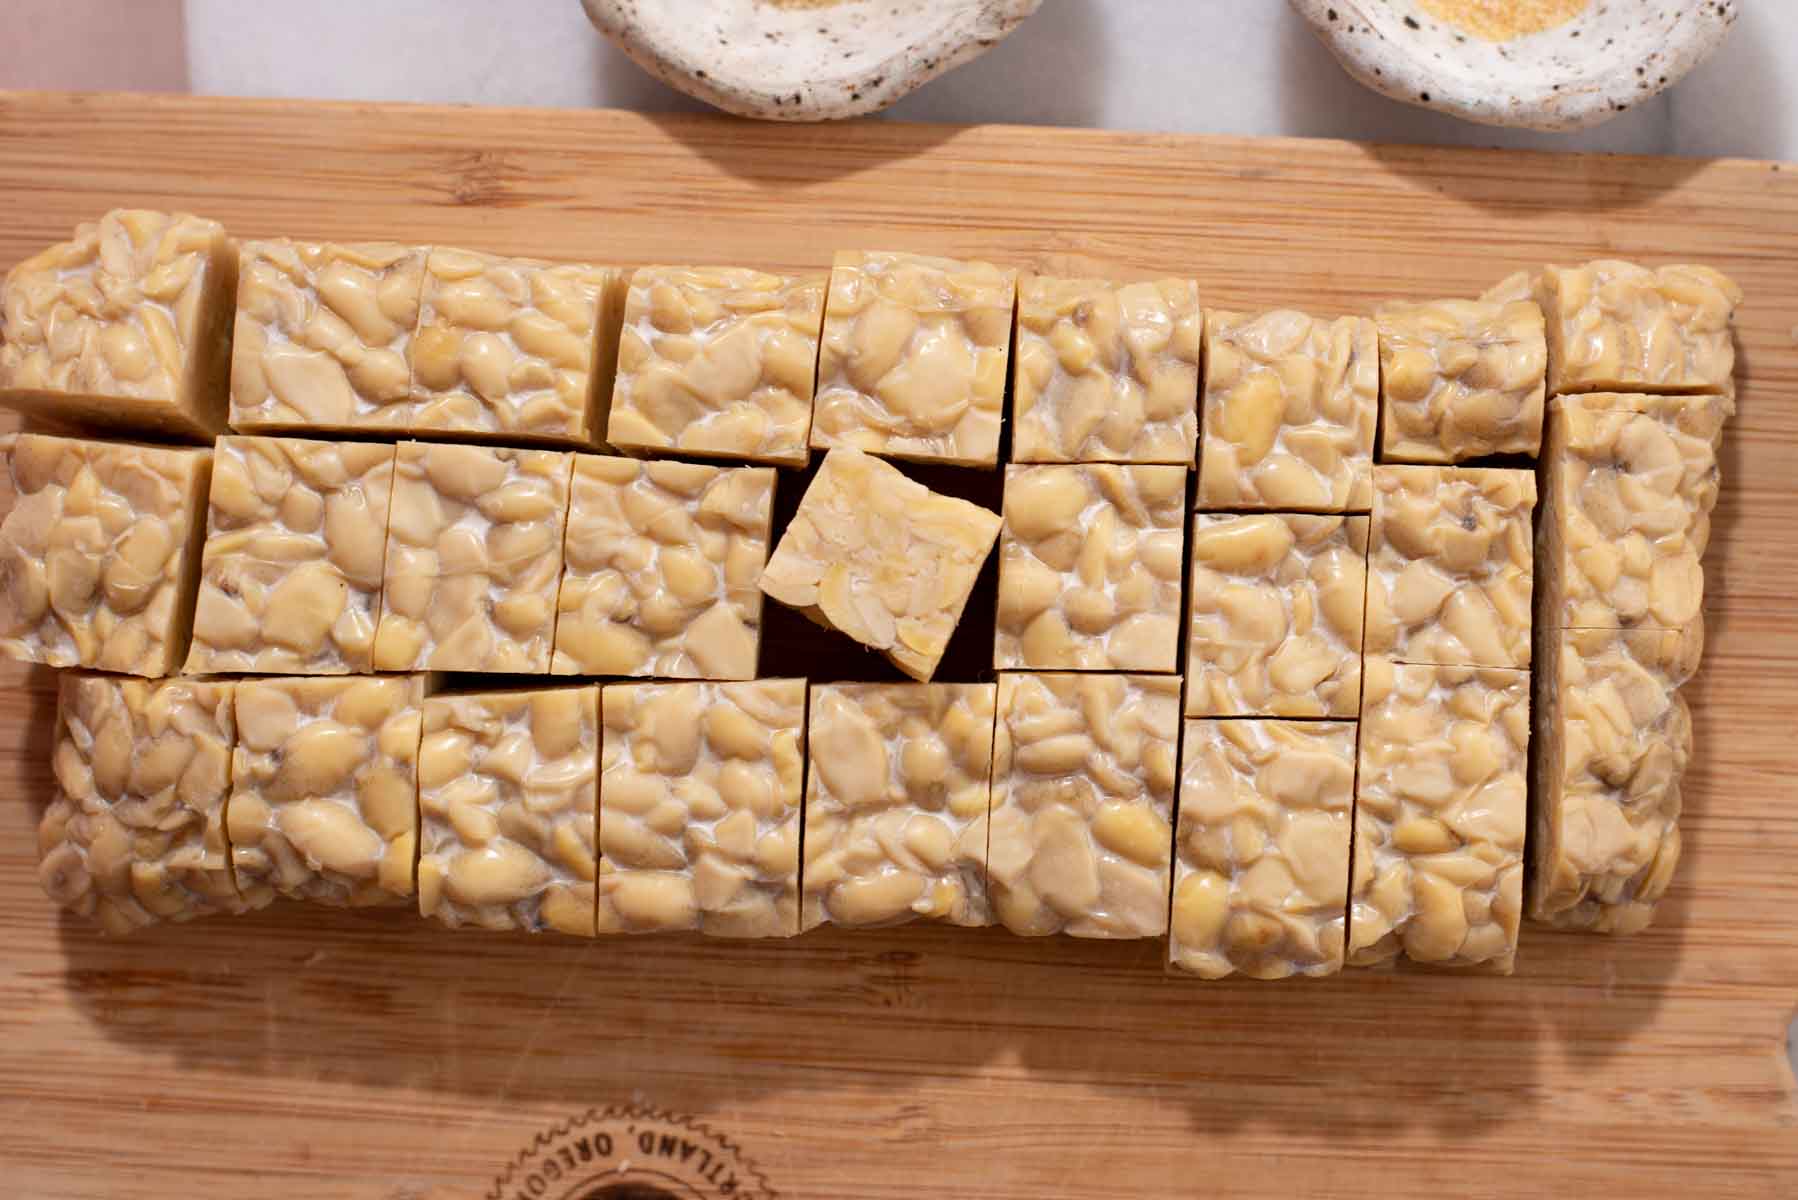 Block of tempeh cut into slices on a wood cutting board.